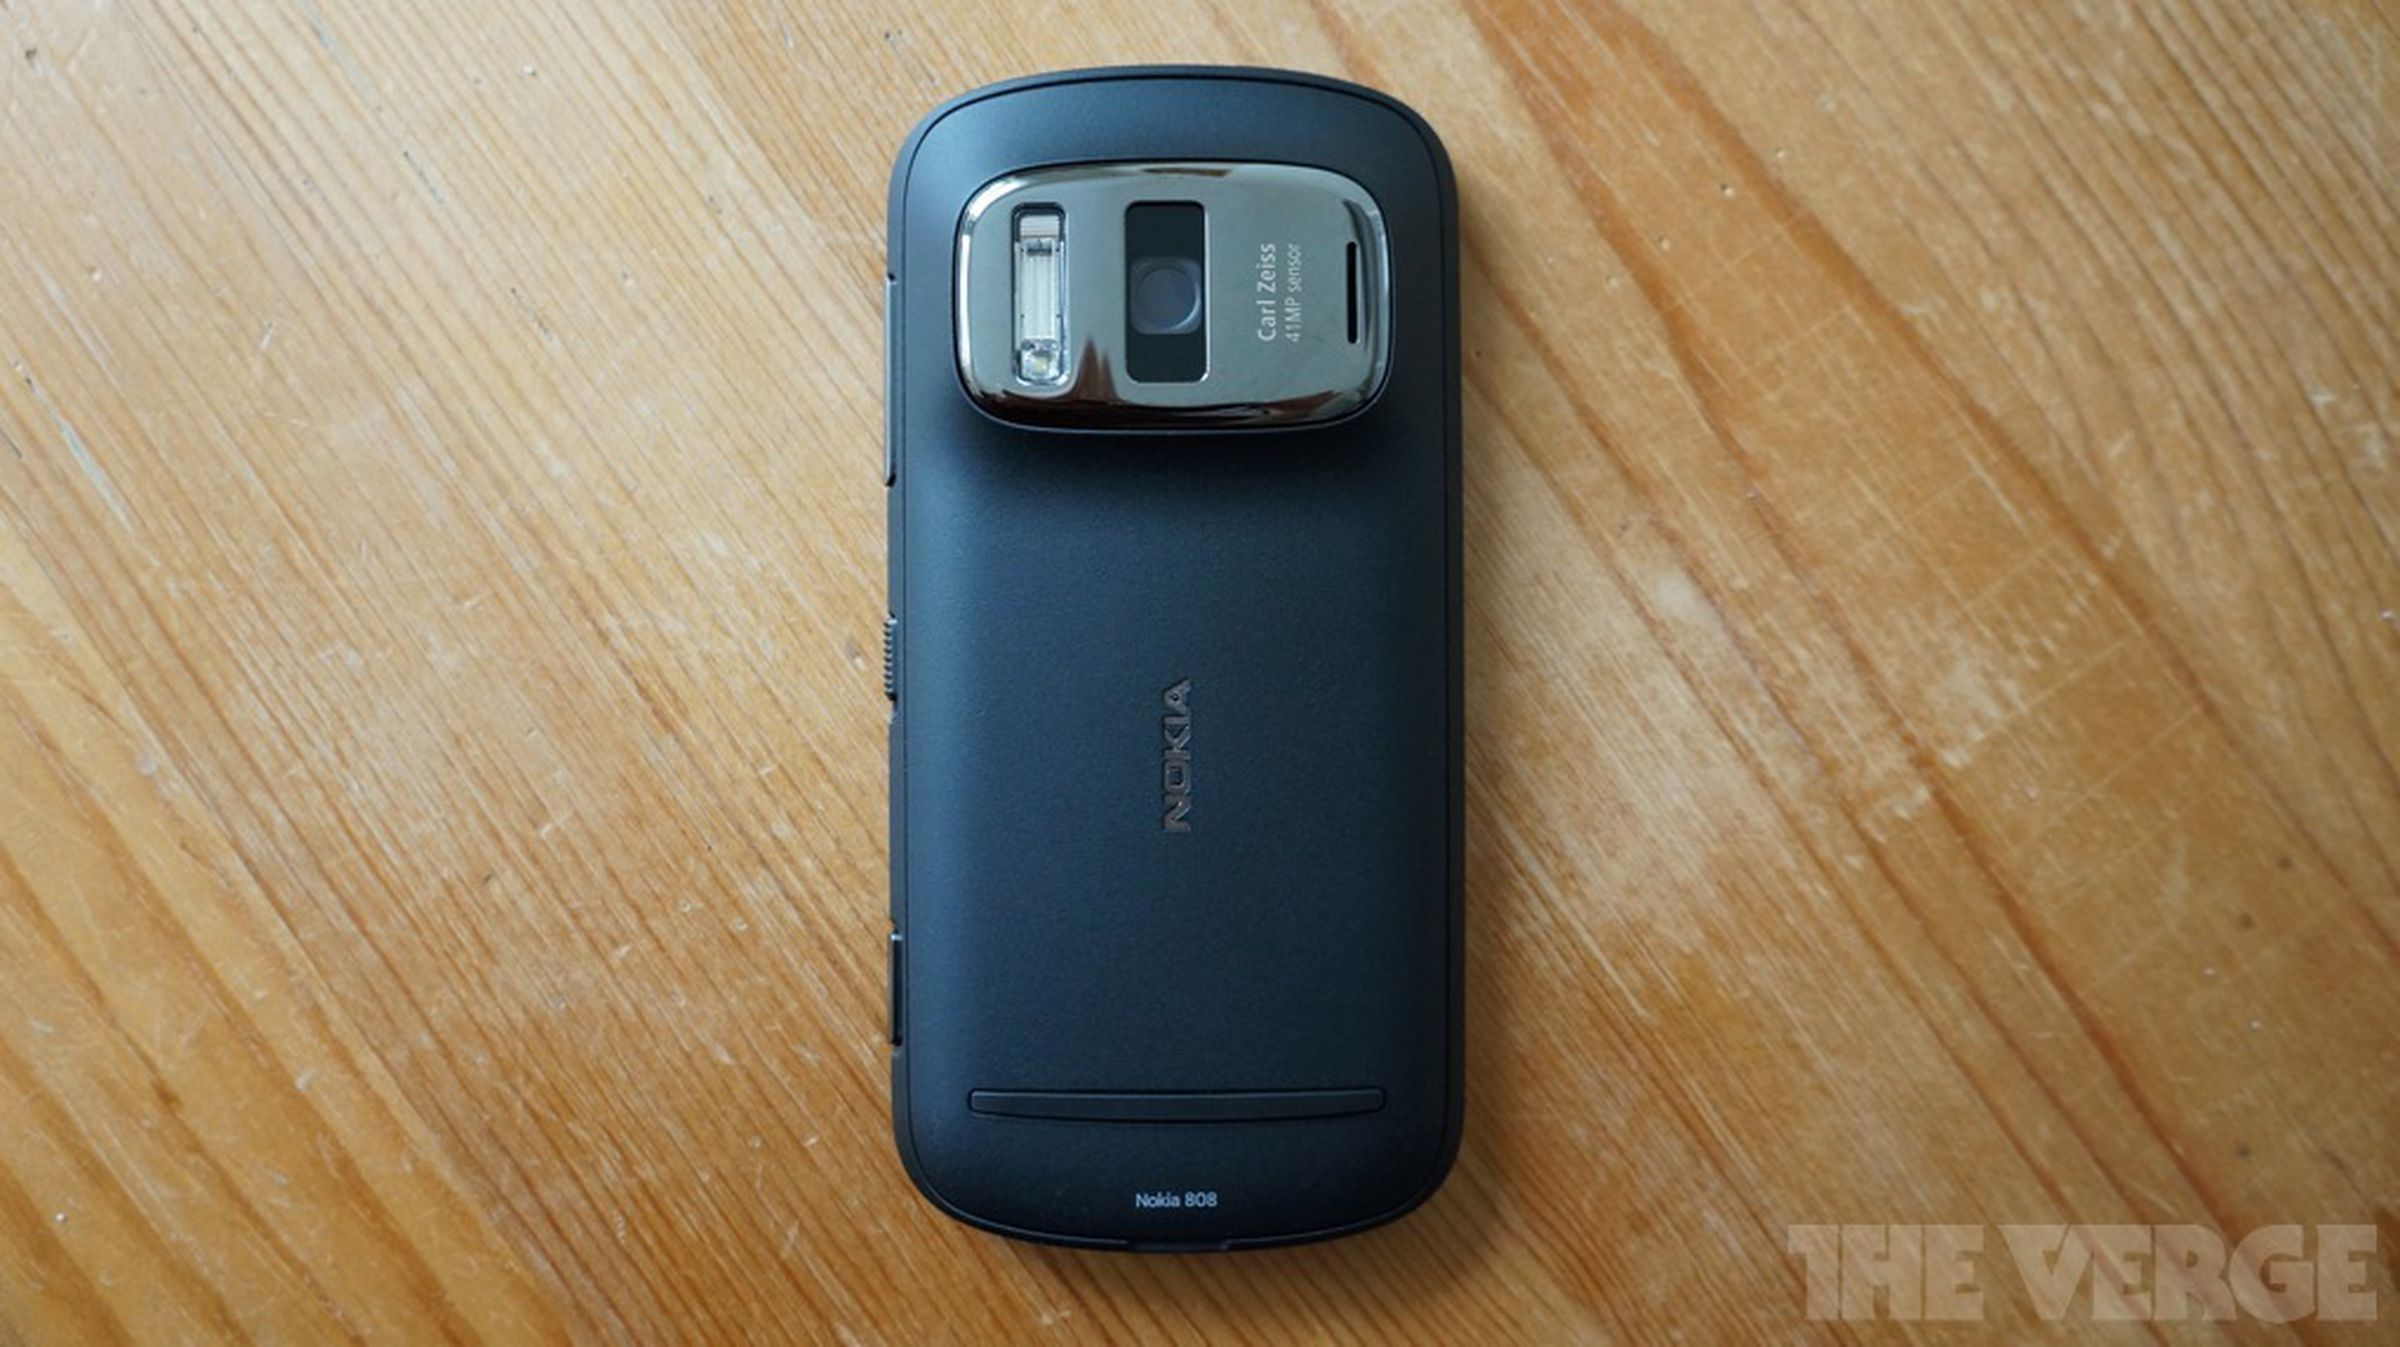 Nokia 808 PureView review gallery